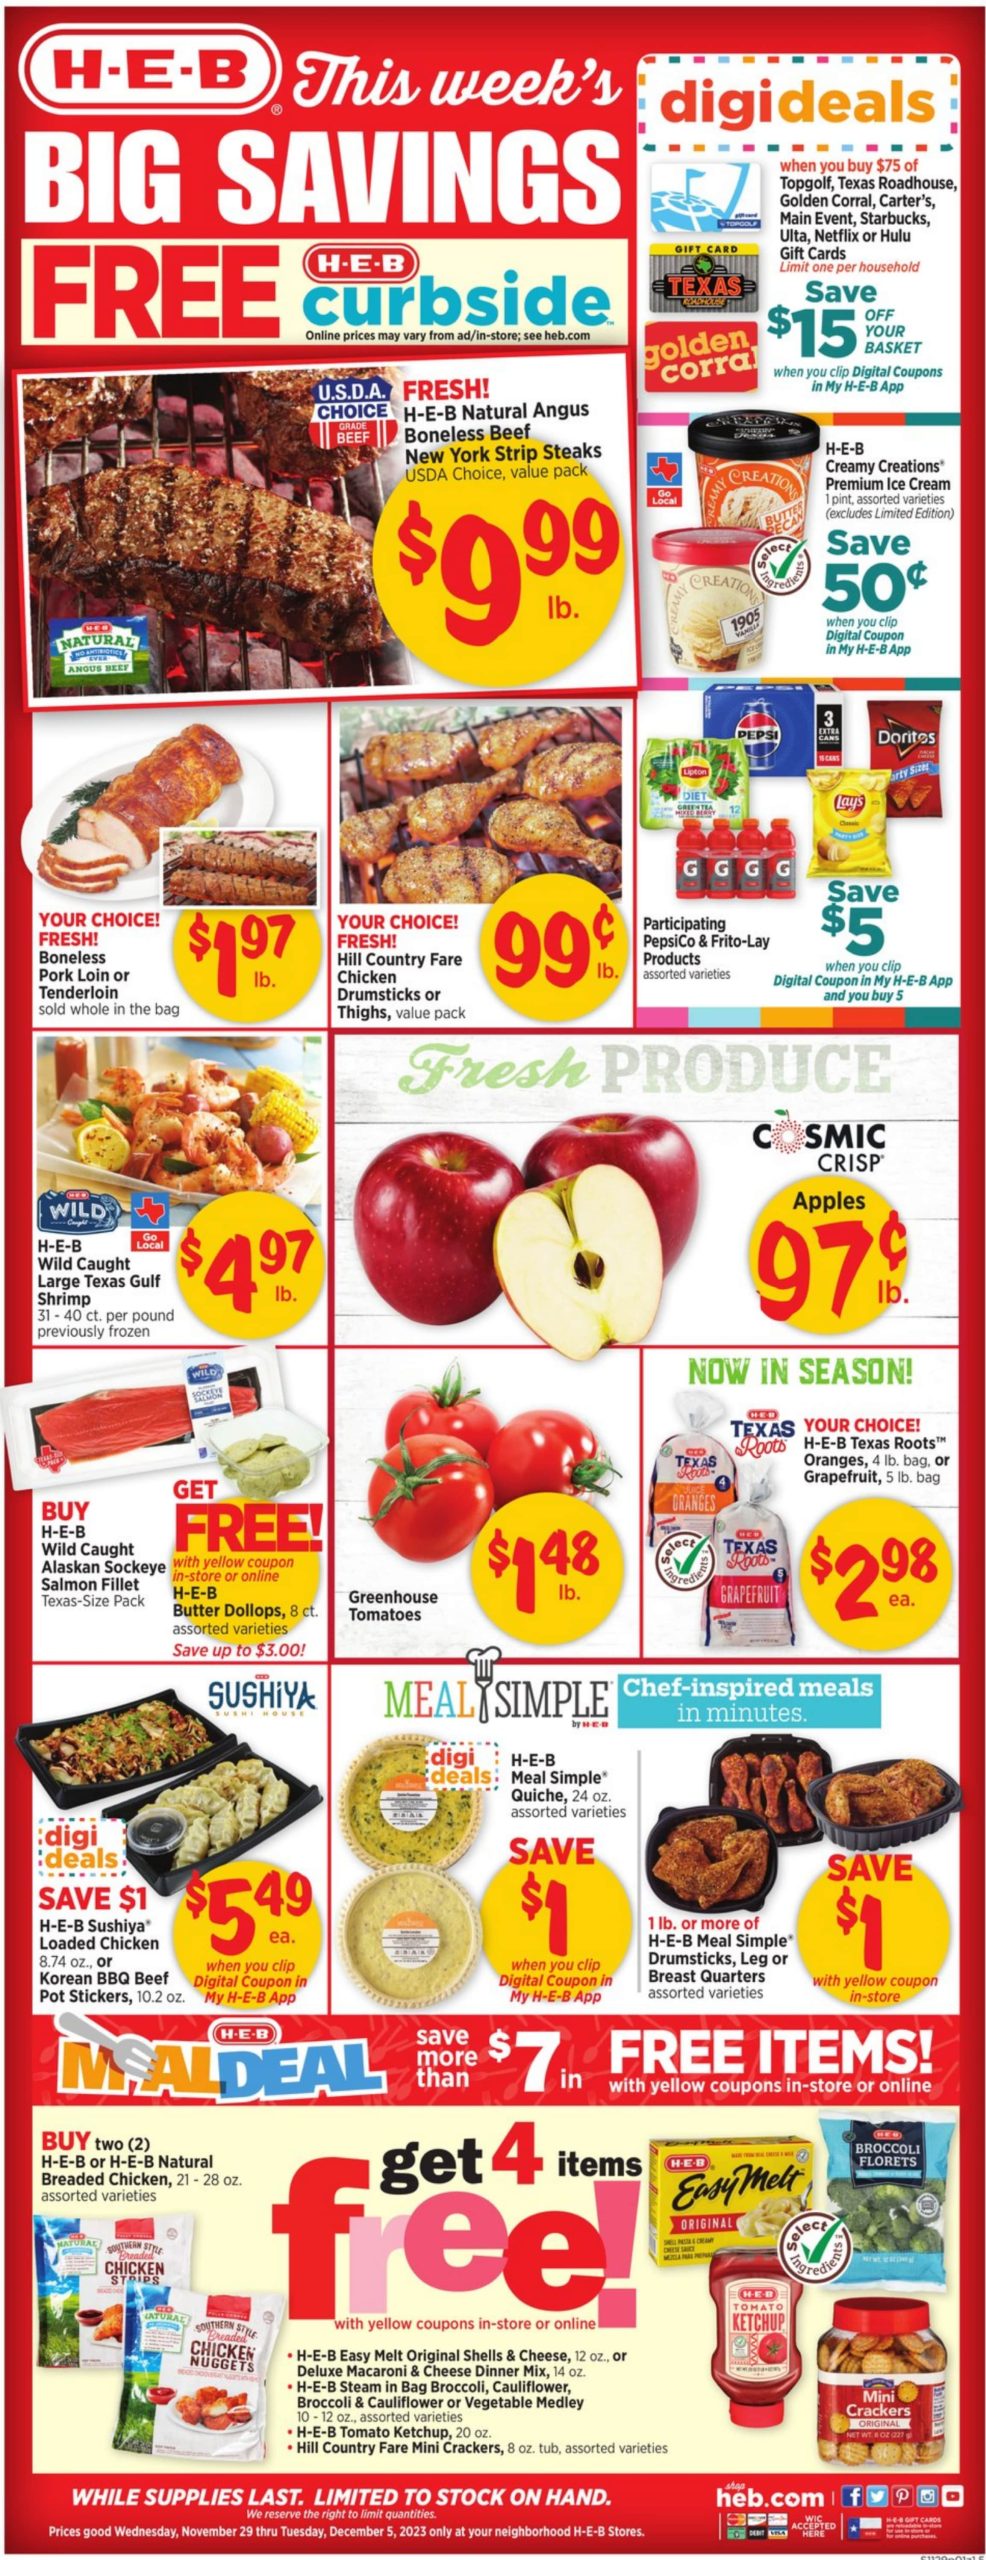 HEB Weekly Ad November 29 to December 5, 2023 1 – heb ad 1 2 scaled